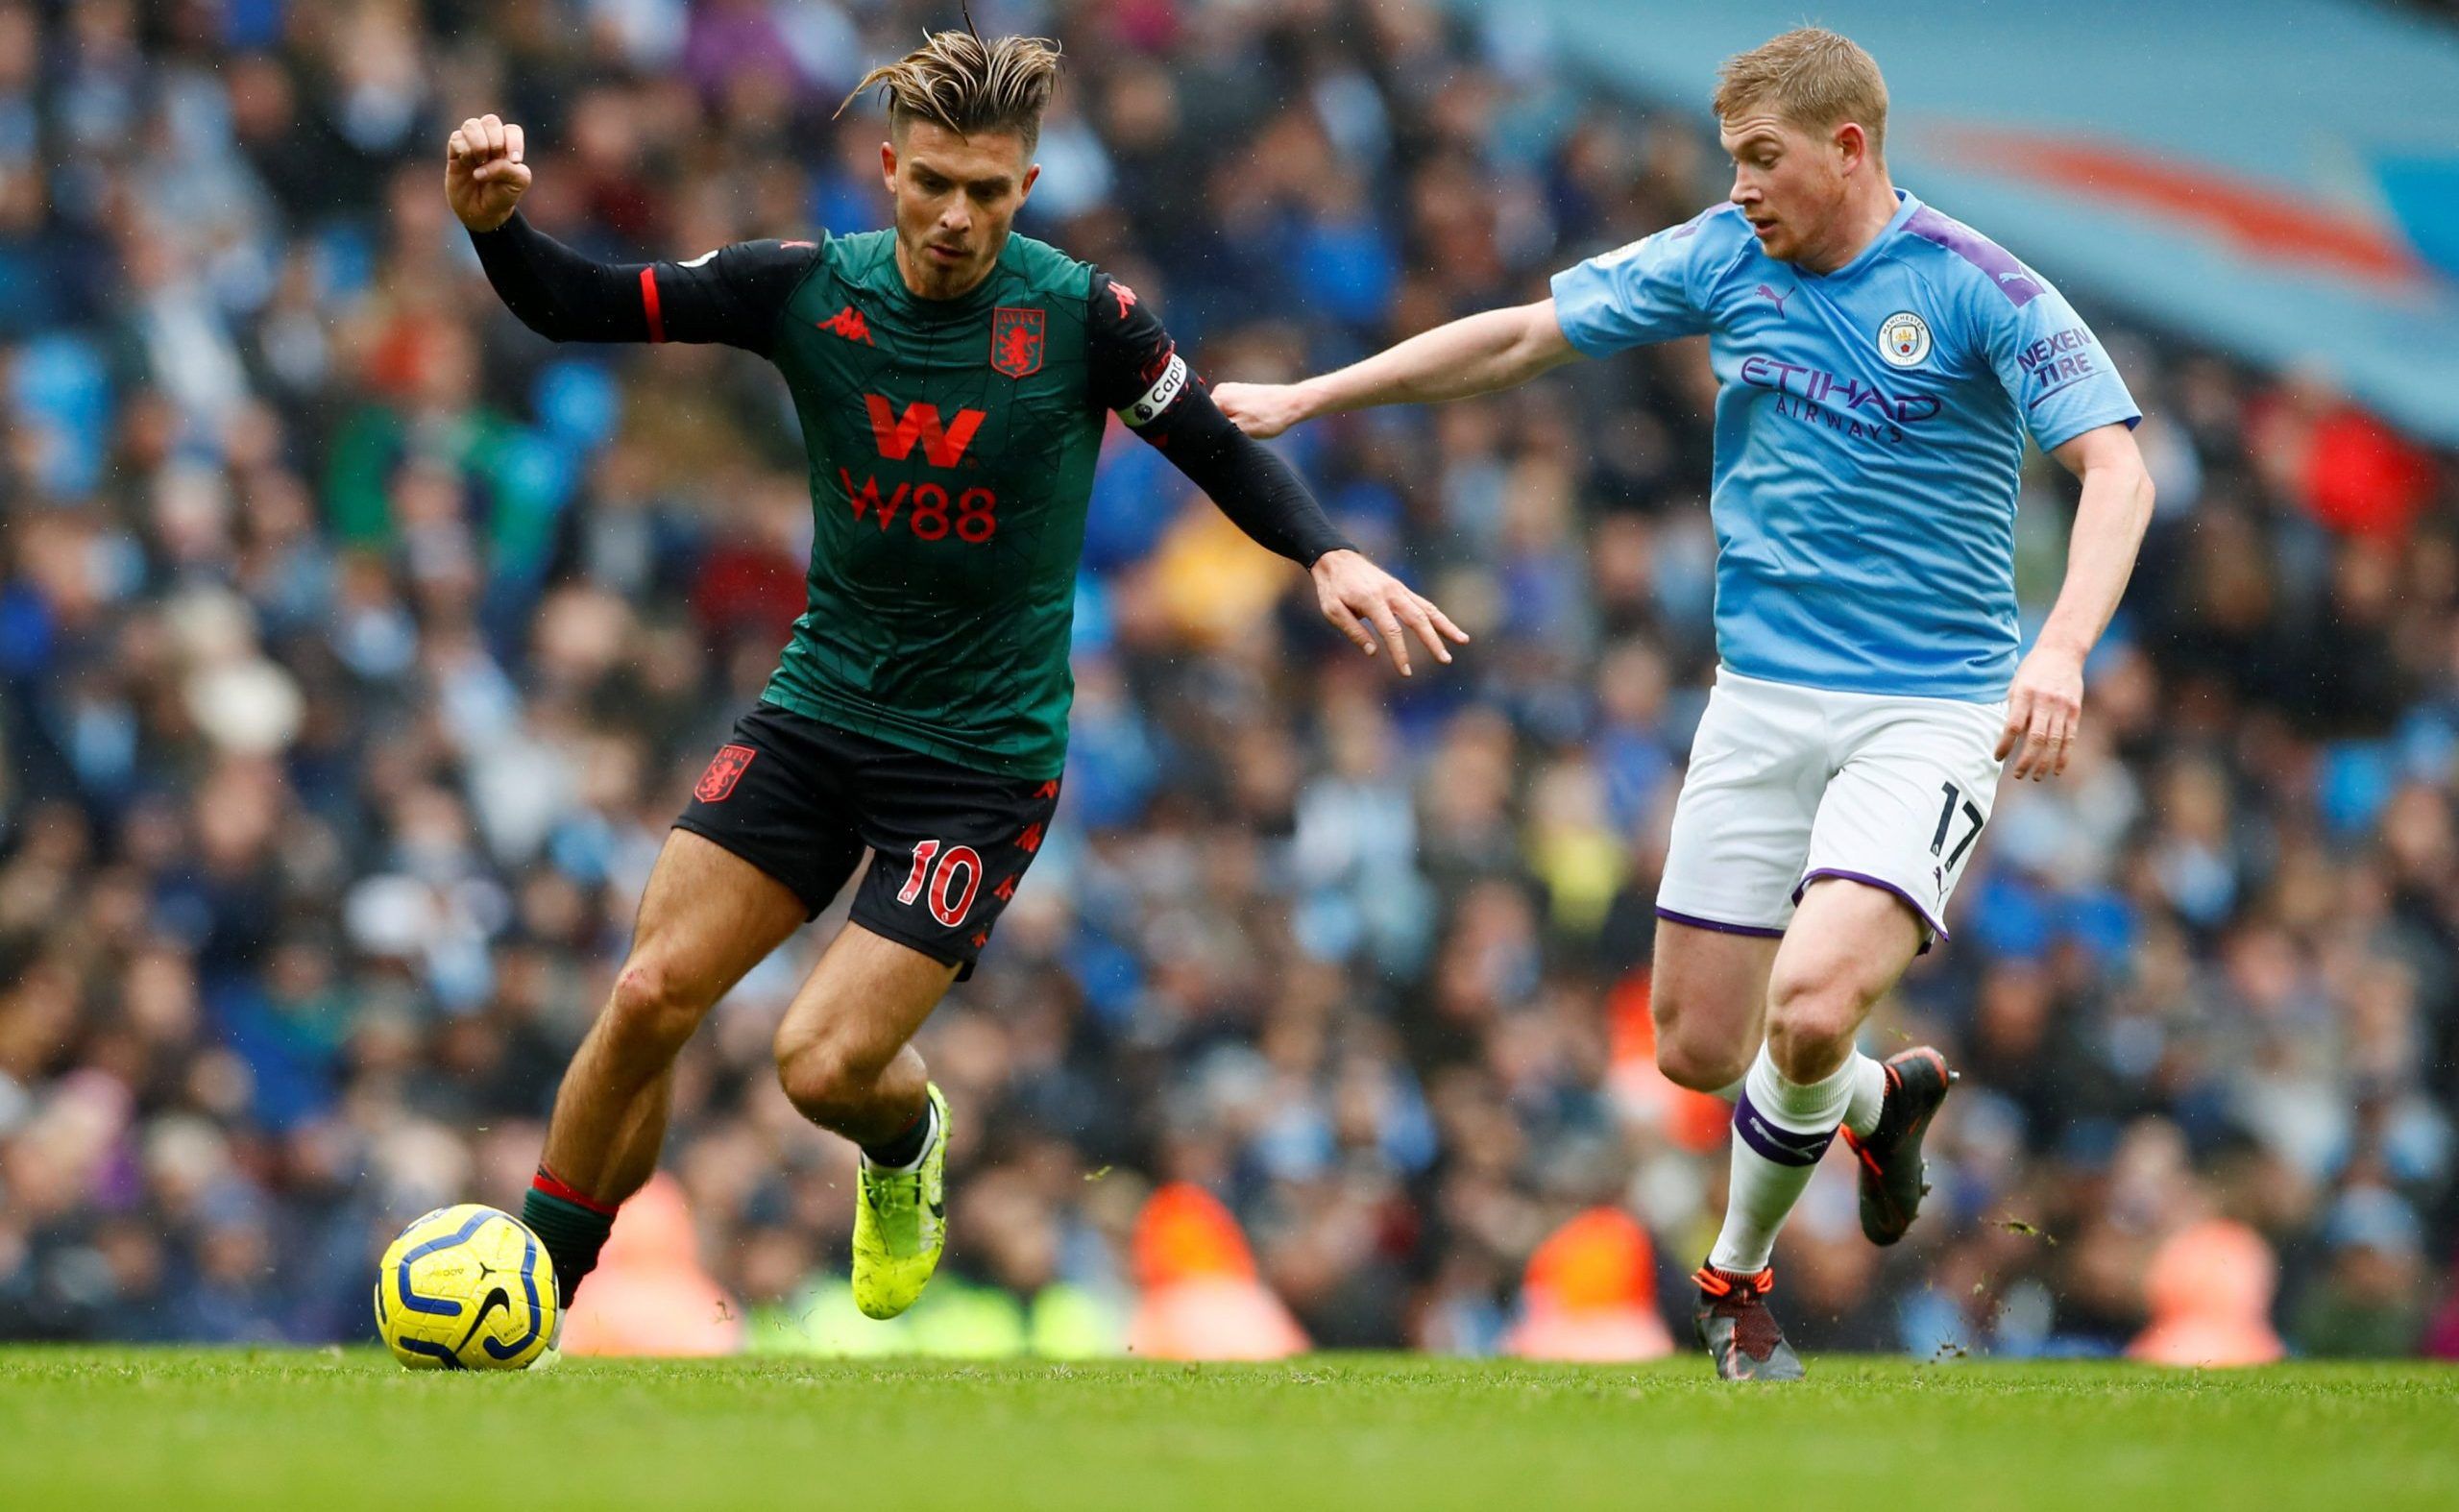 Aston Villa's Jack Grealish in action with Manchester City's Kevin De Bruyne